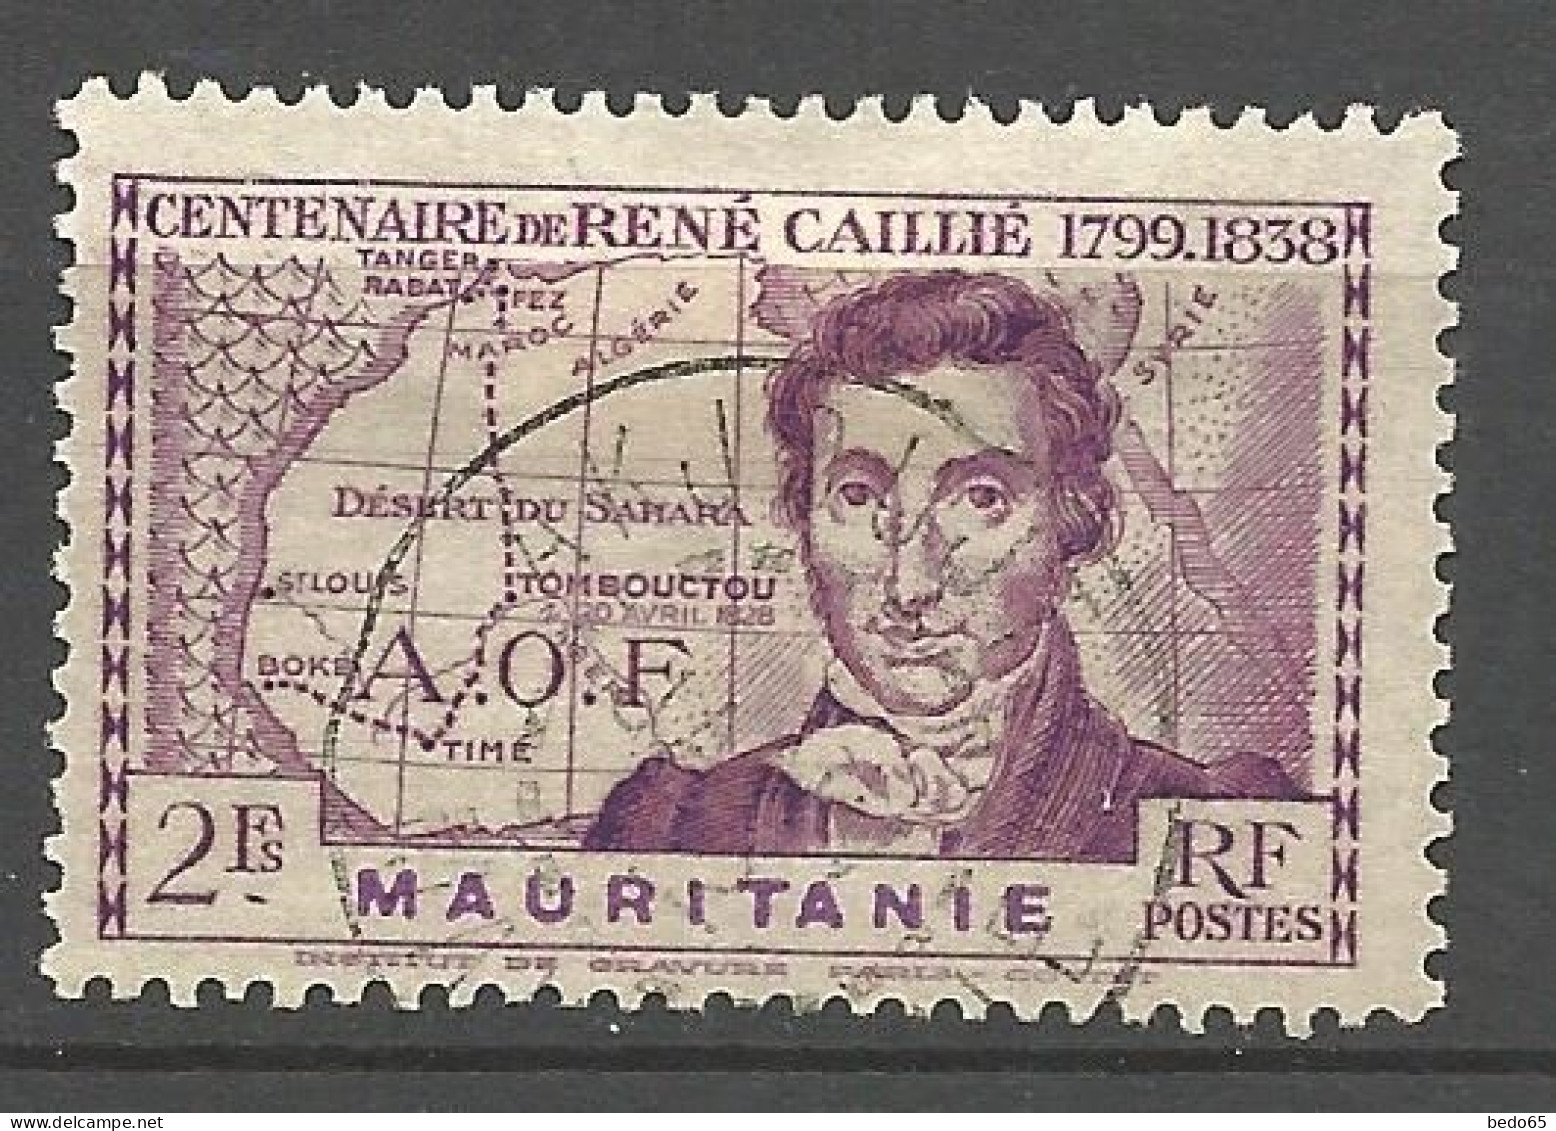 MAURITANIE N° 96 CACHET AKJOUJT / Used - Used Stamps